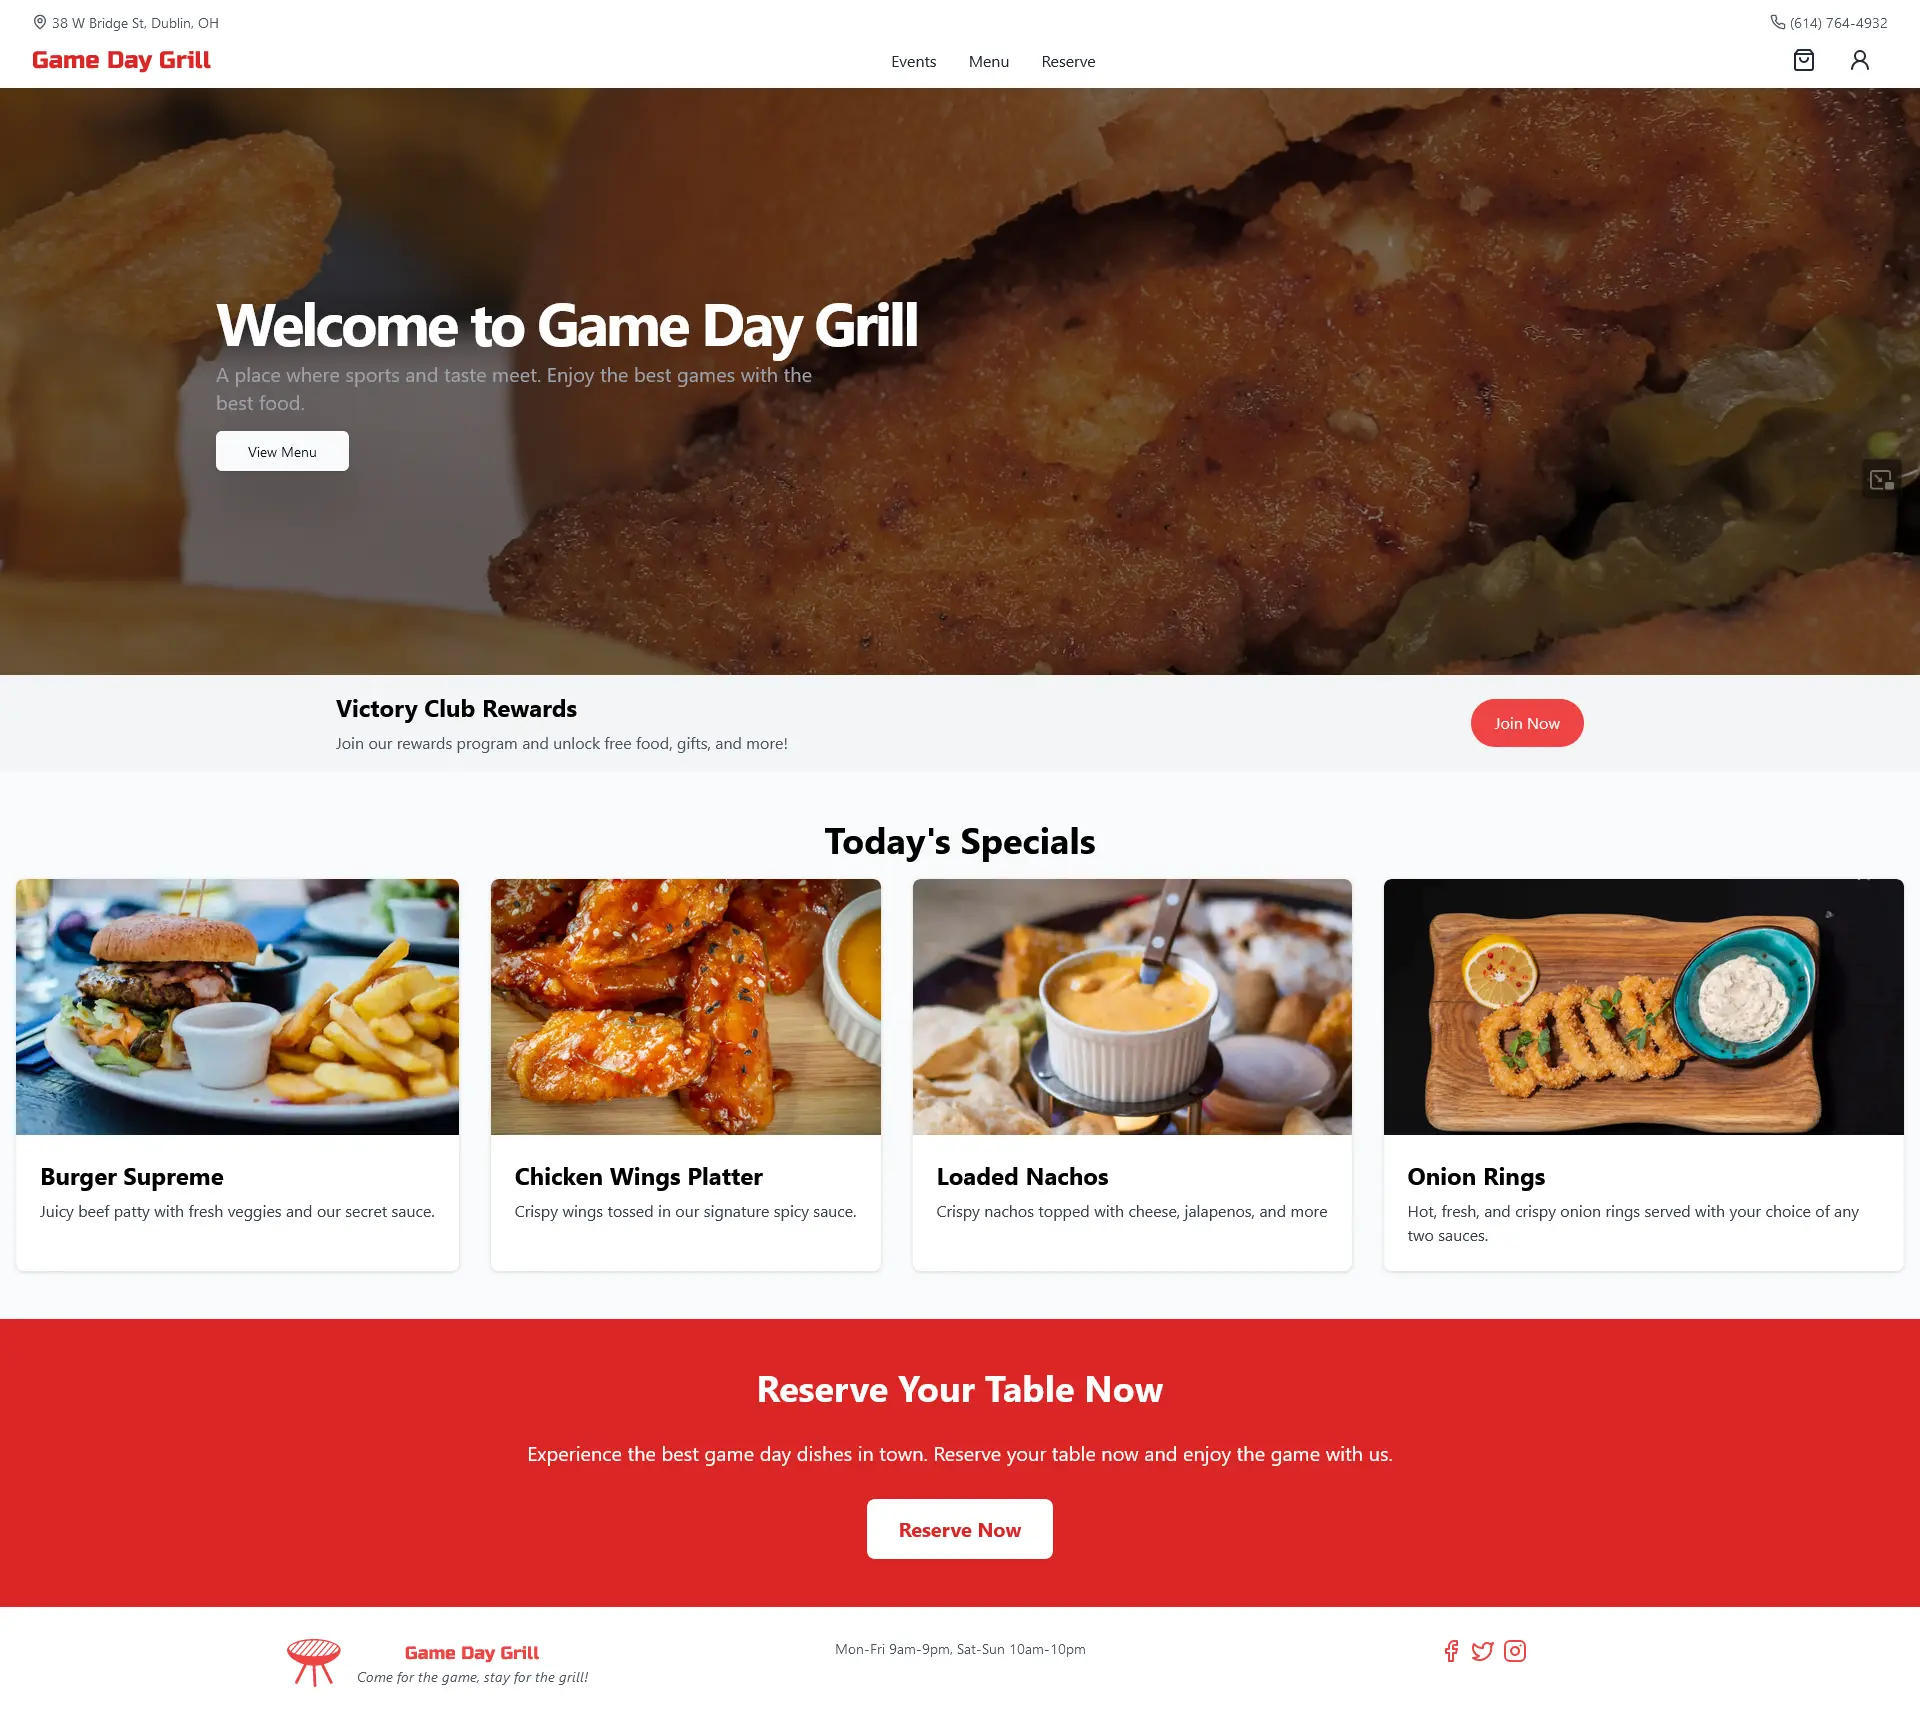 Game Day Grill's landingpage